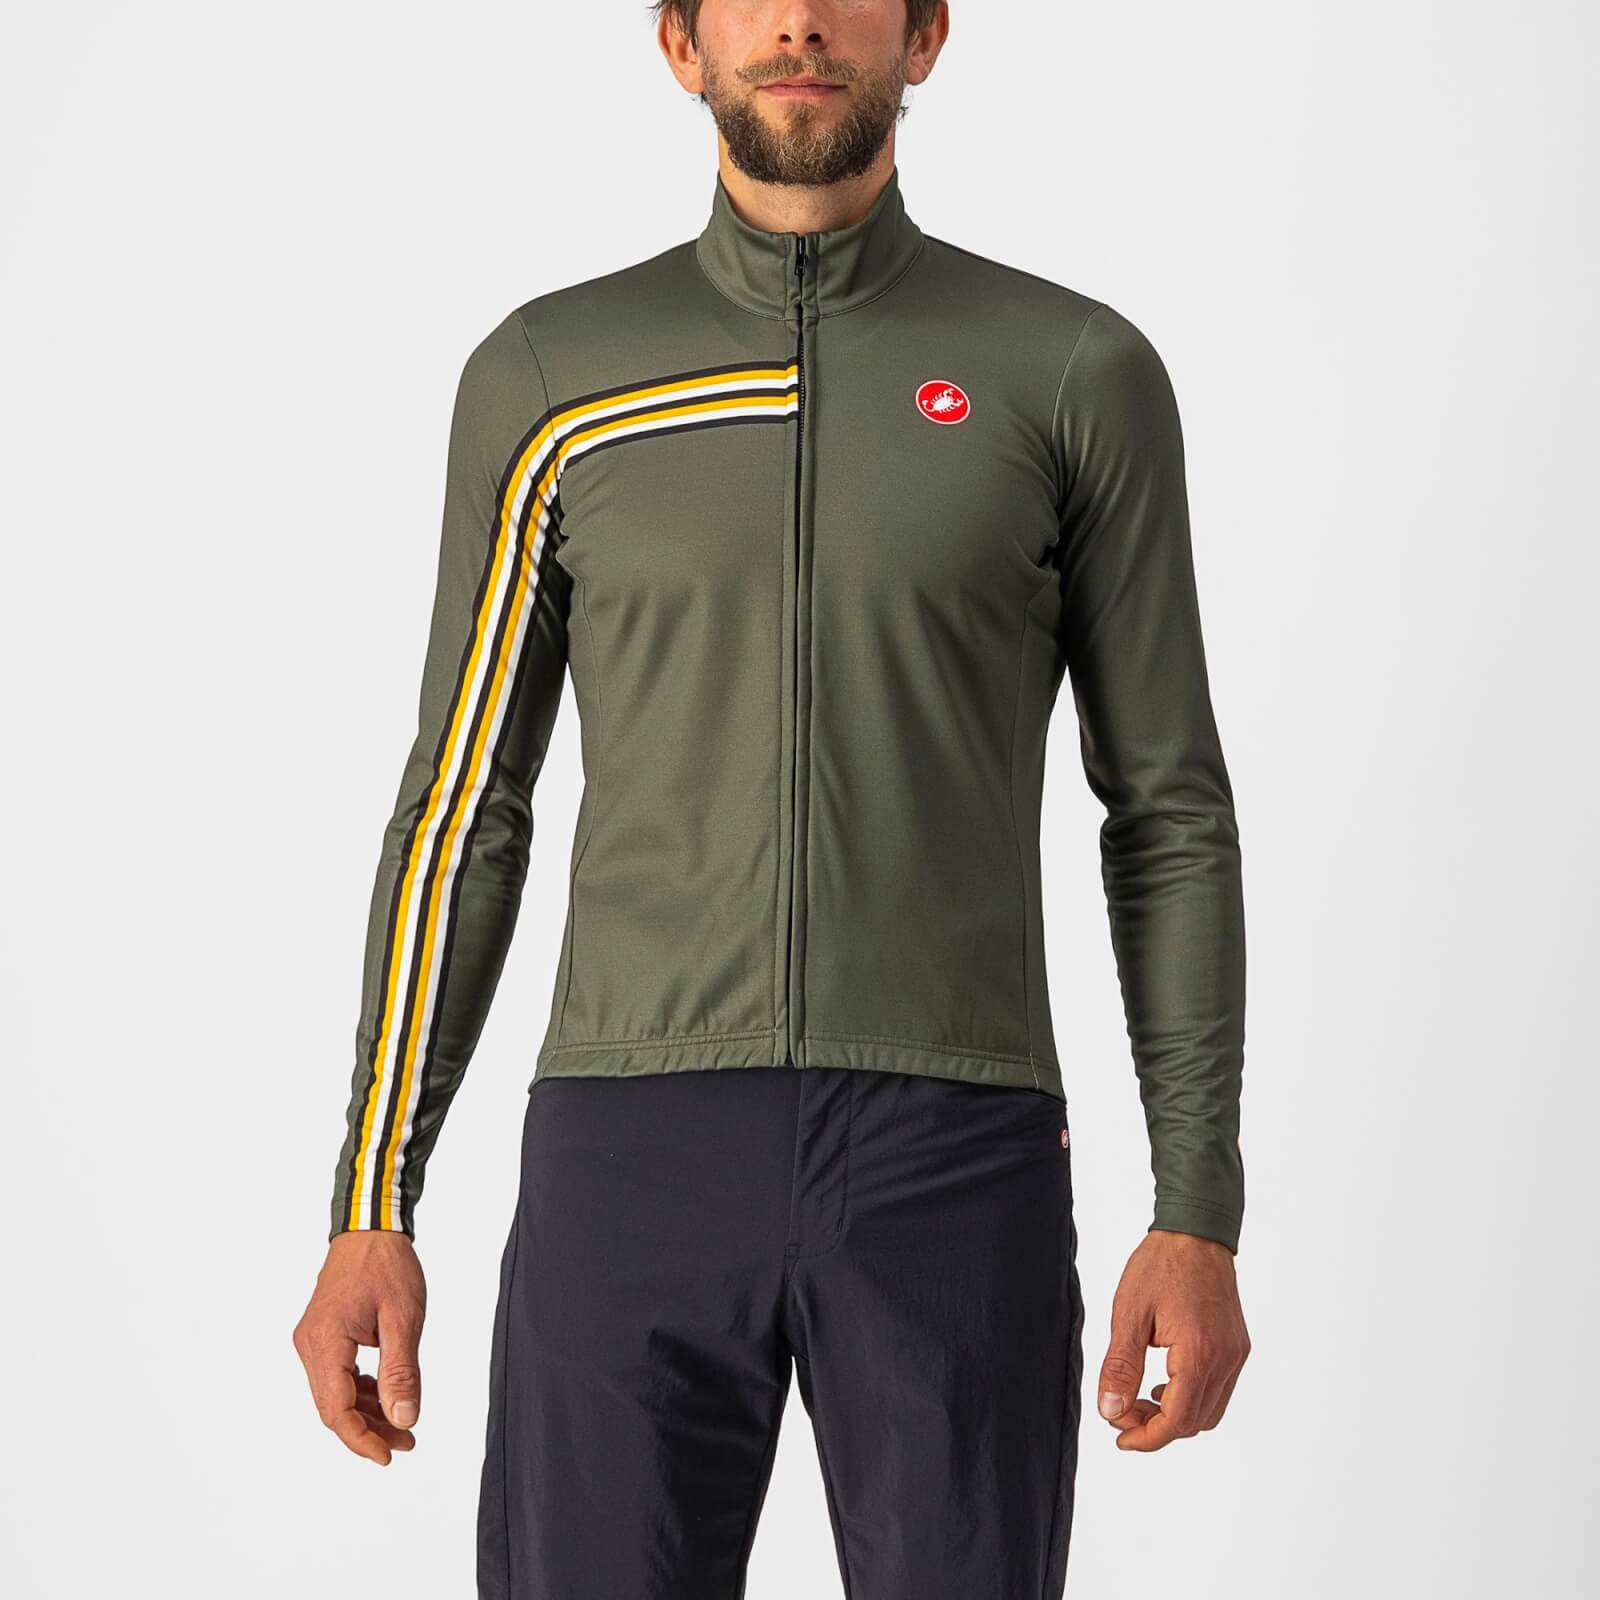 Castelli Unlimited Thermal Jersey - XXL - Military Green/Goldenrod